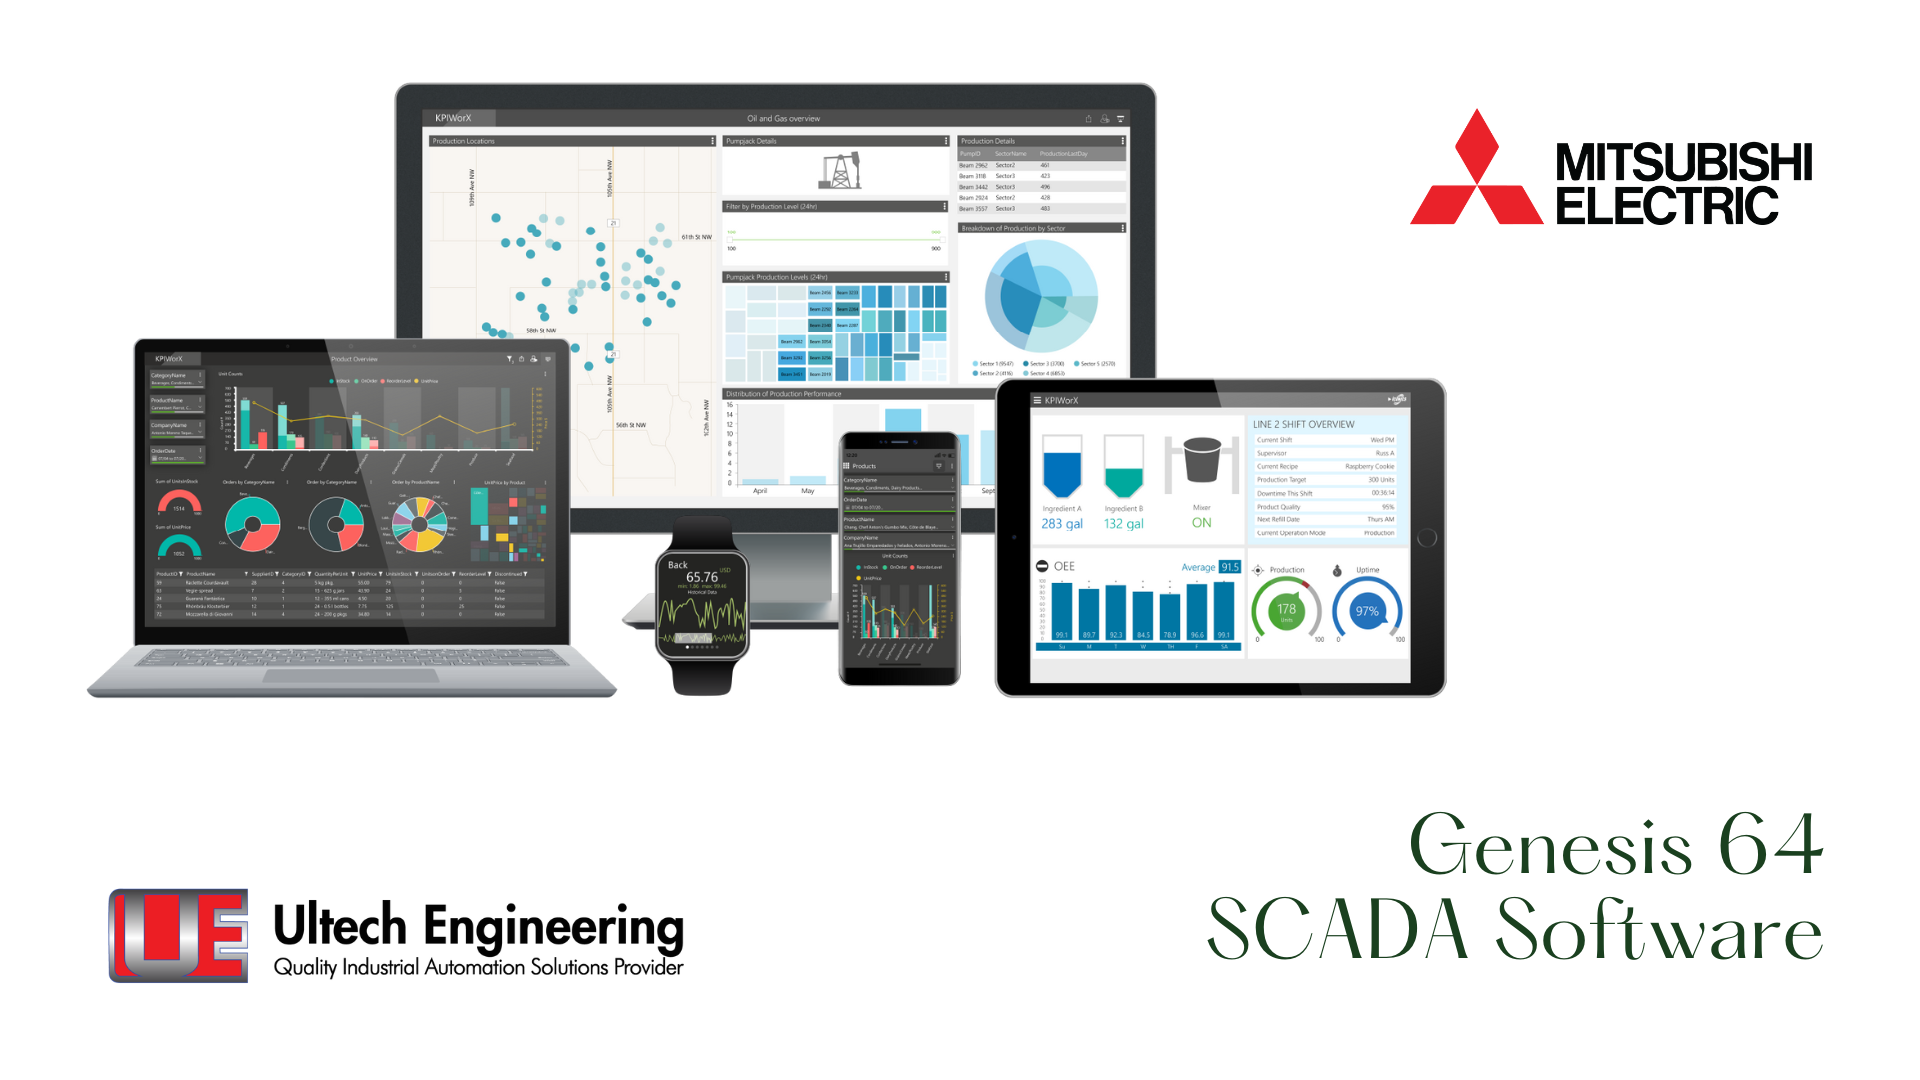 Transforming Palm Oil Milling in Sarawak with Mitsubishi Electric's Genesis64 SCADA Software